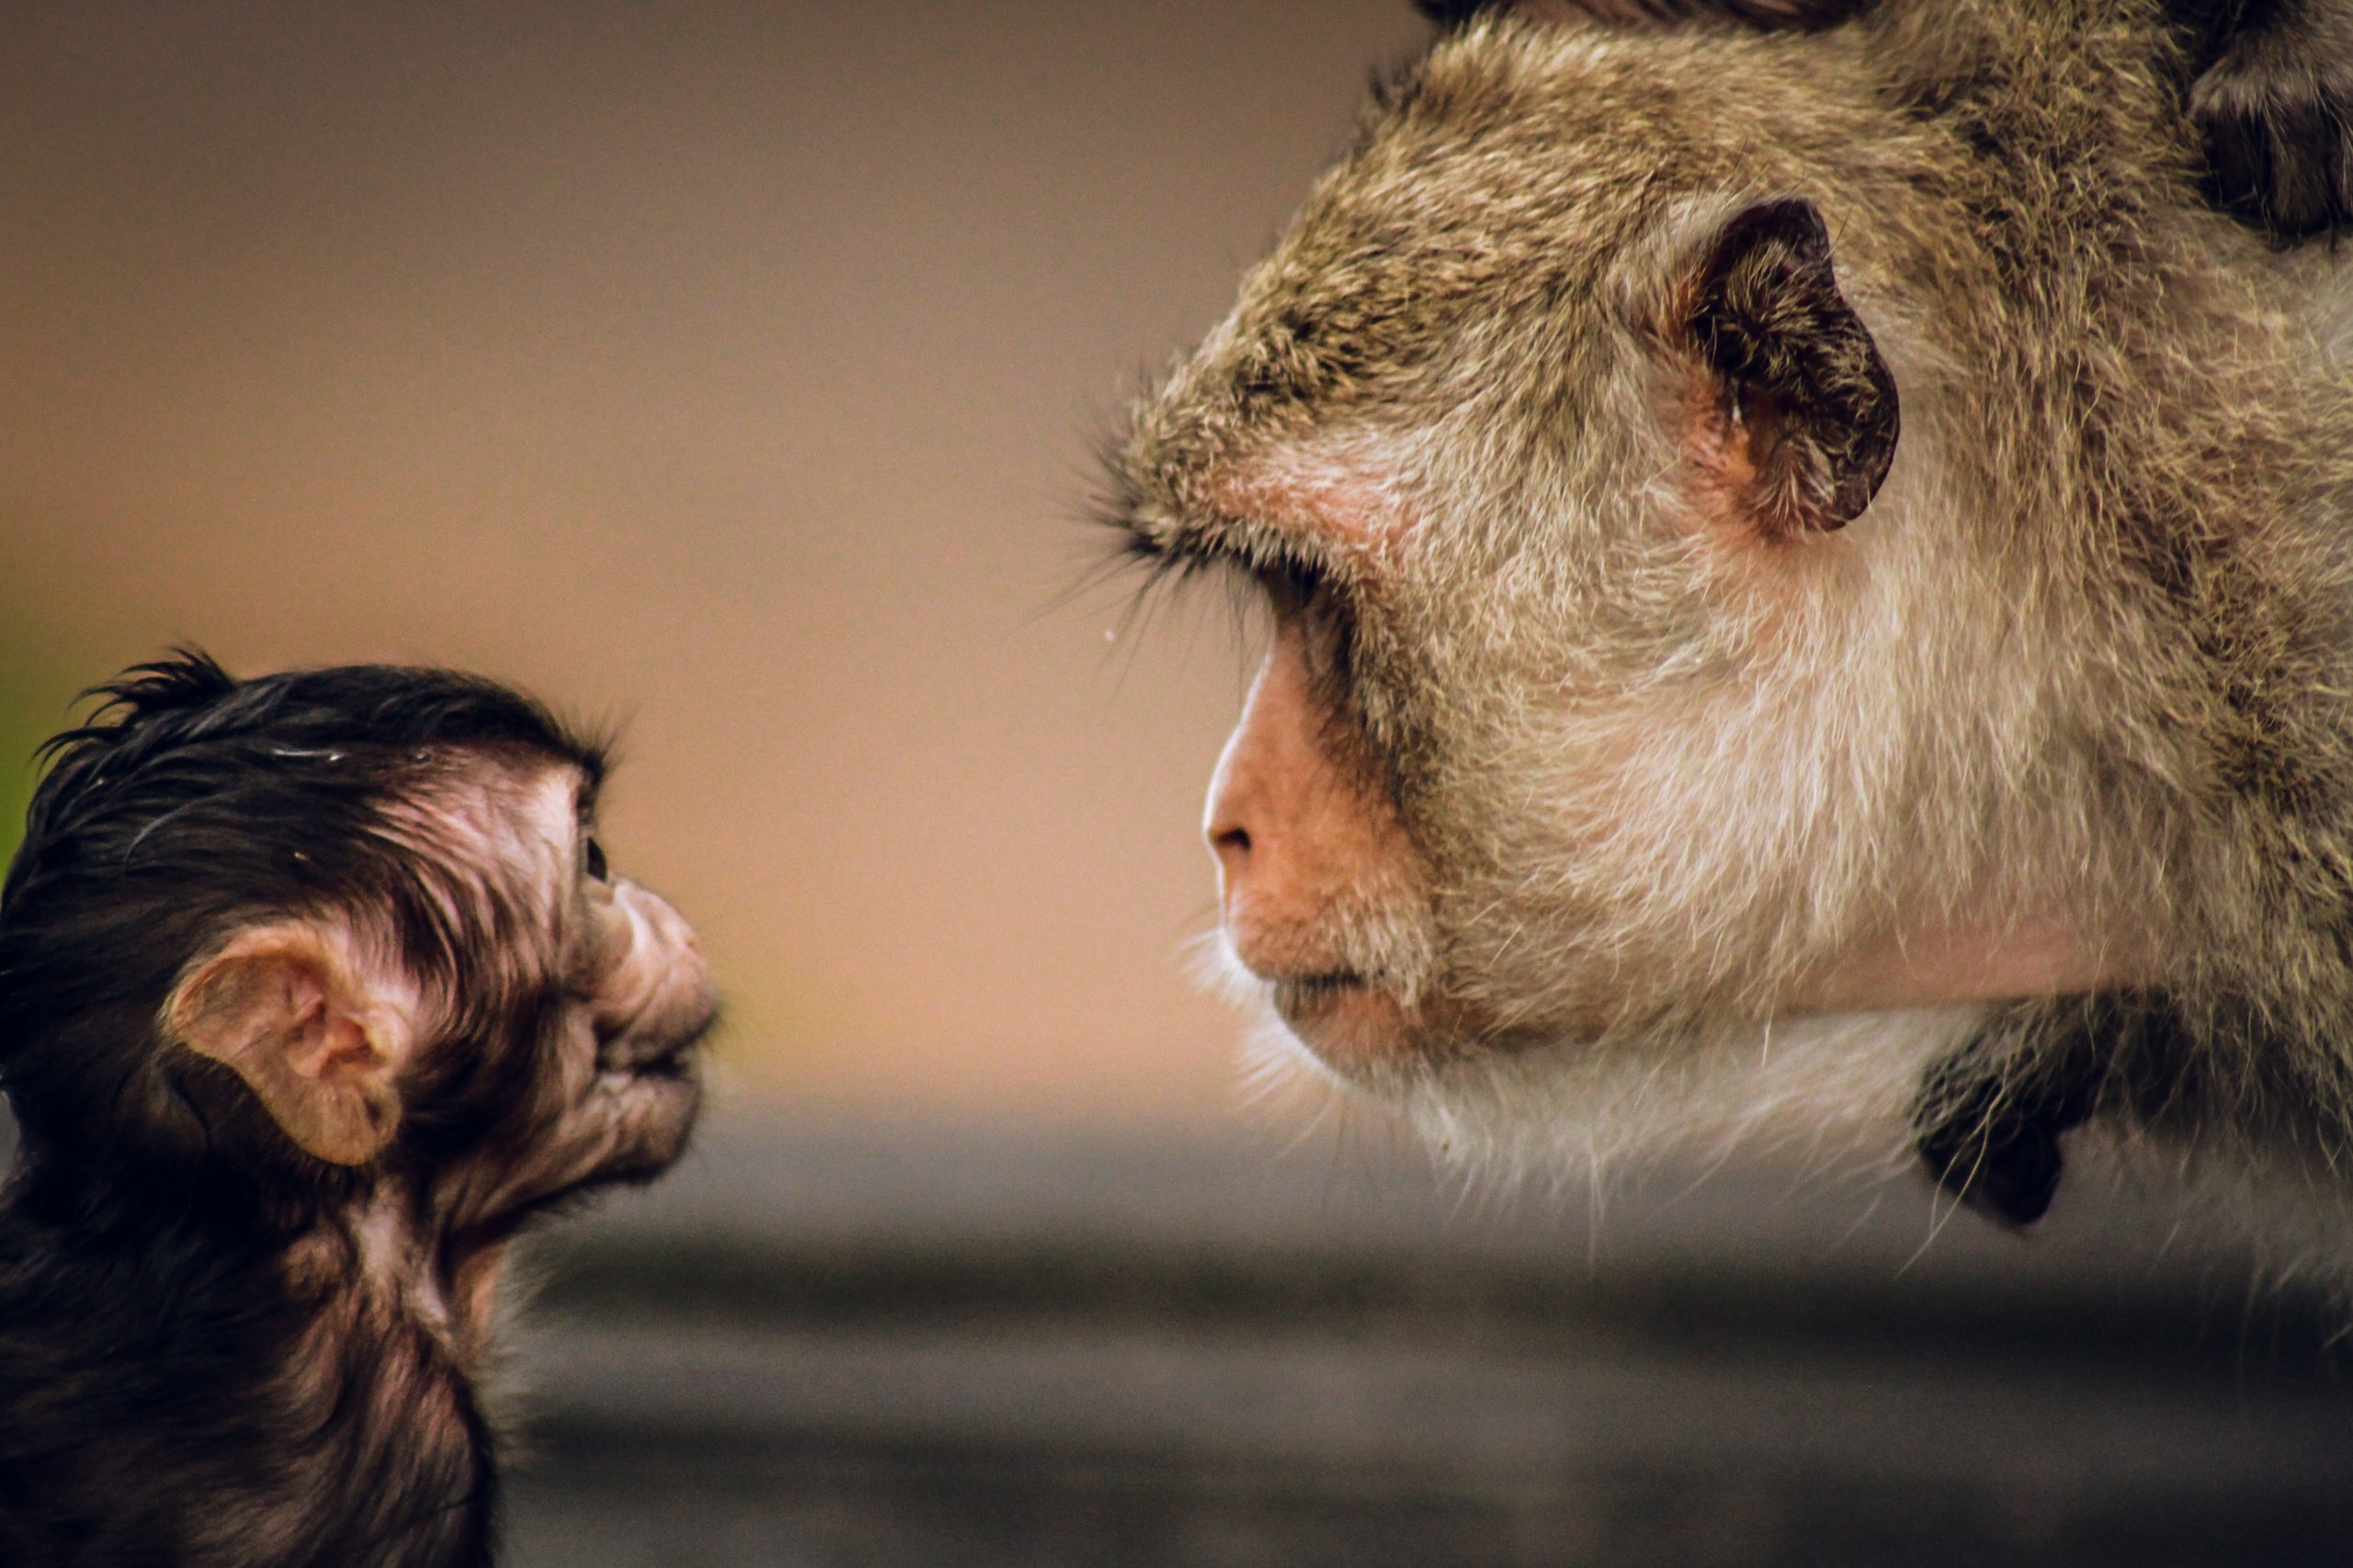 Monkeys gazing at each other